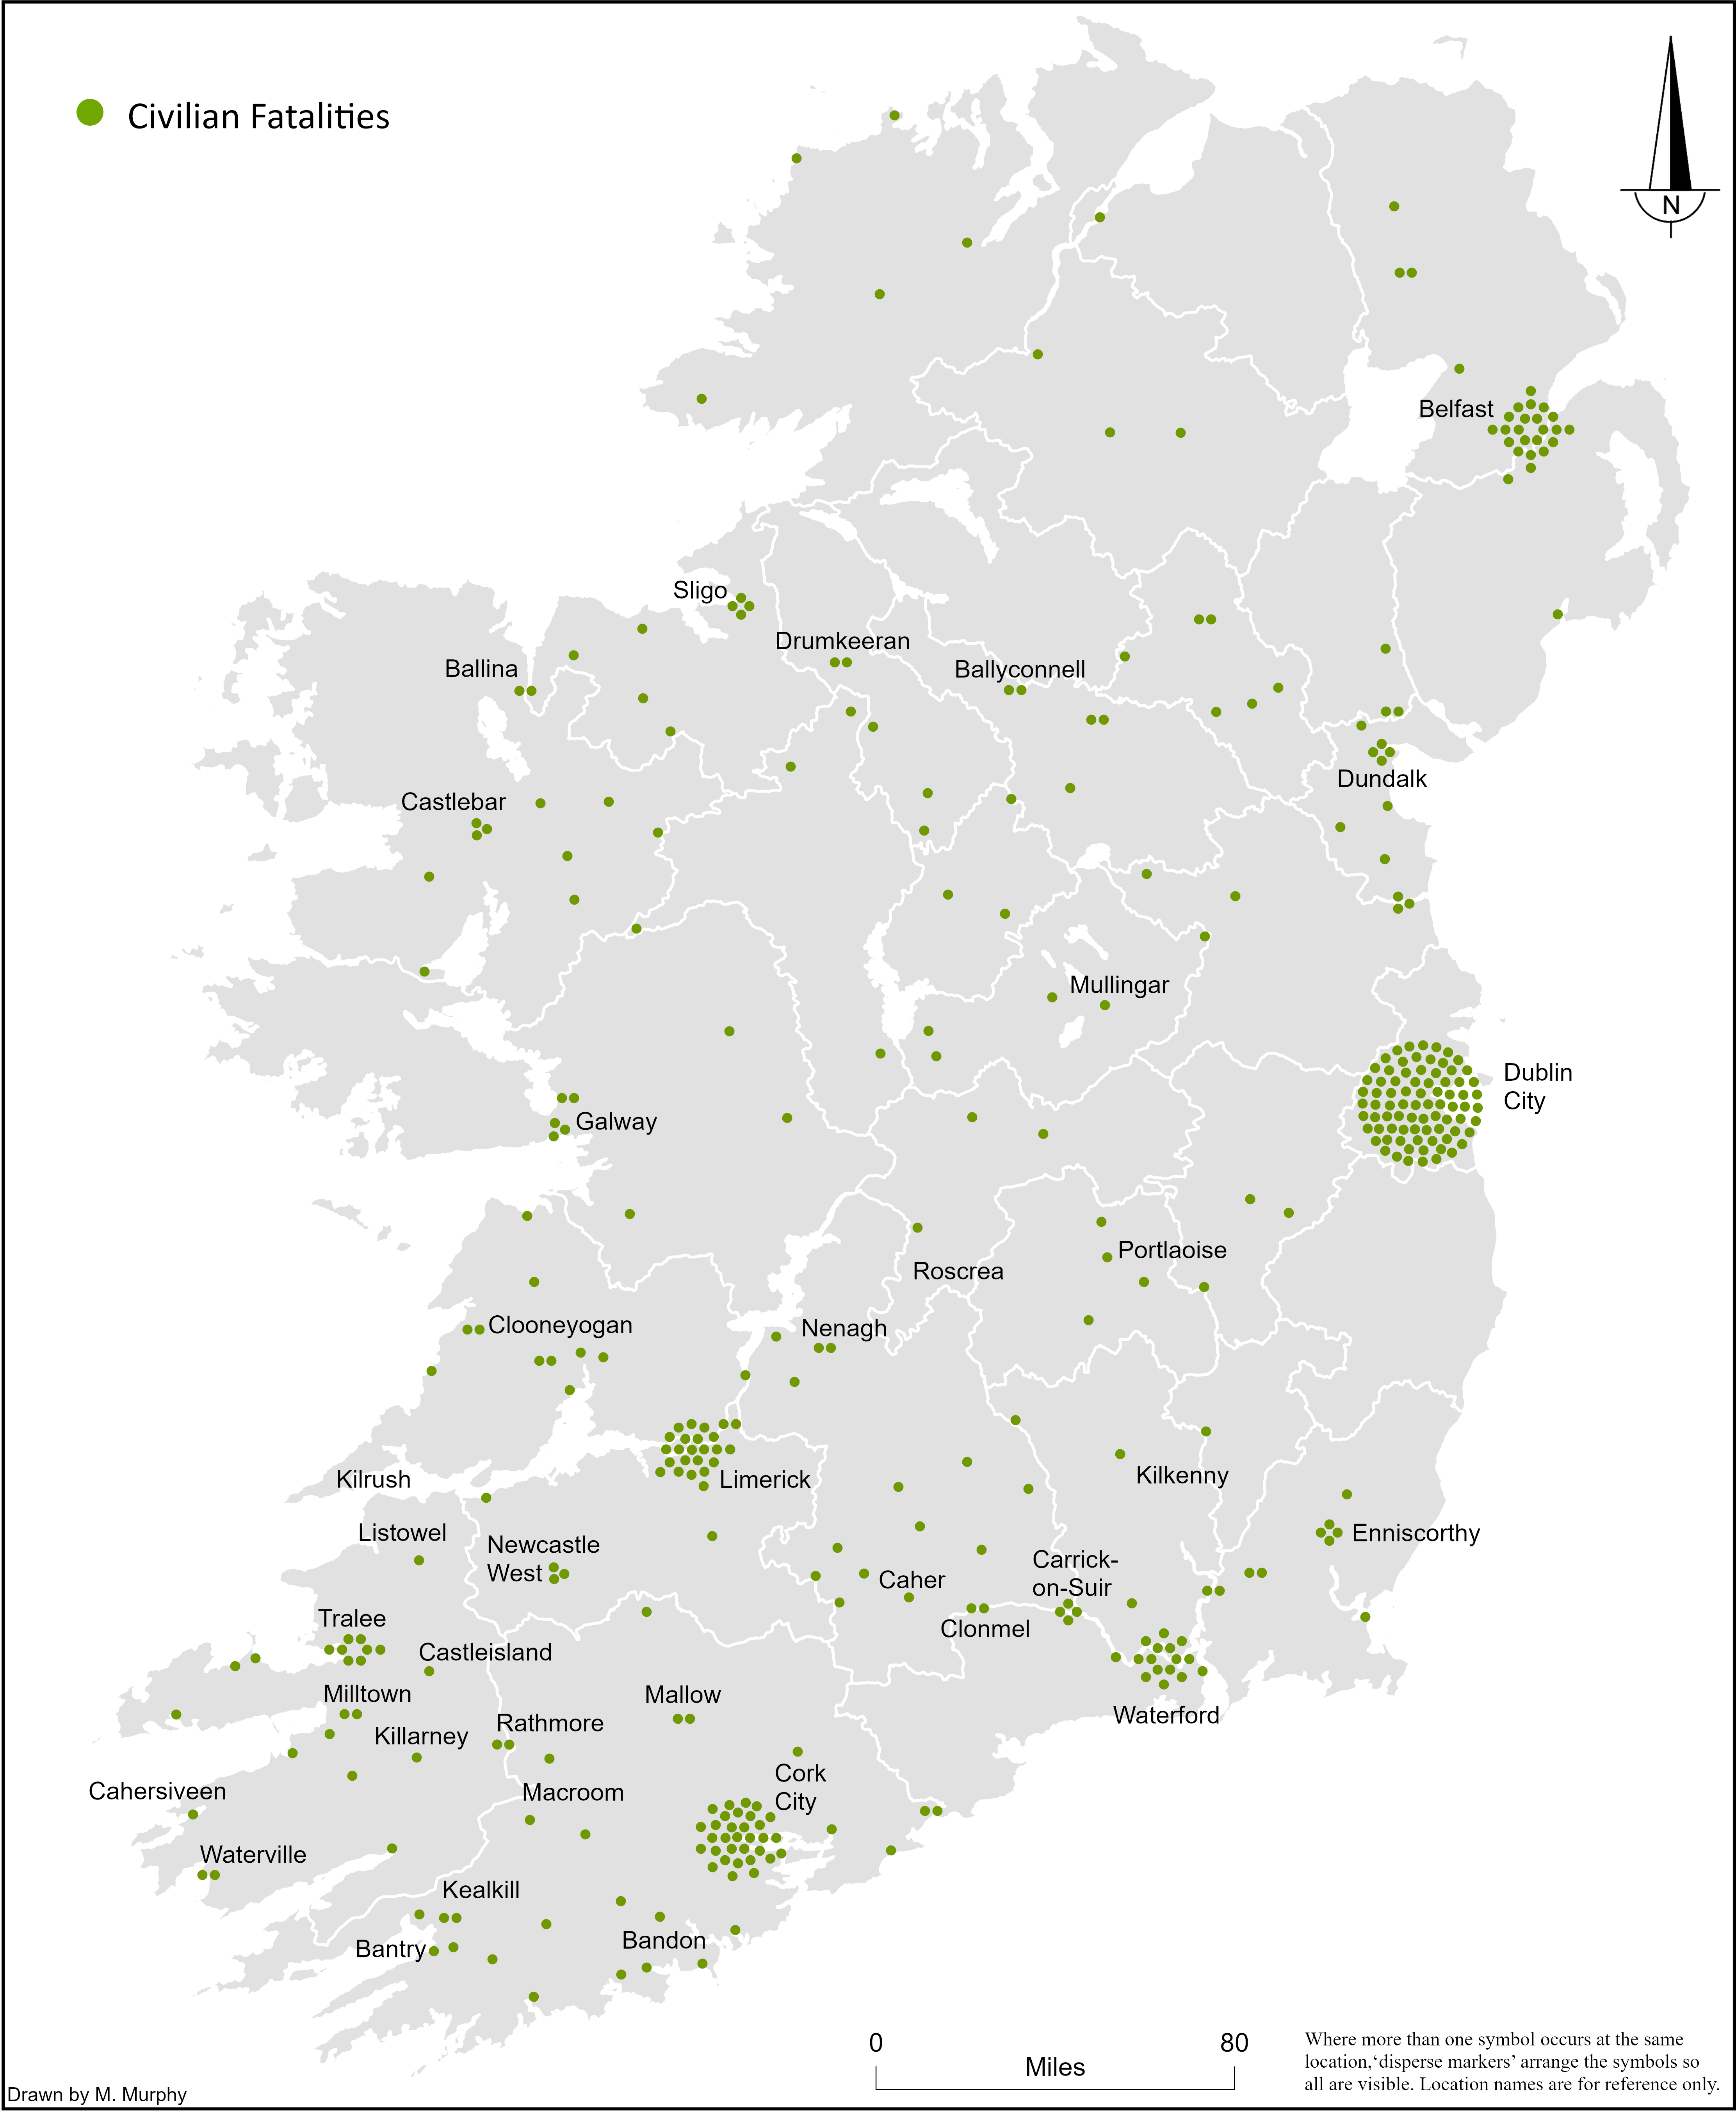 Map showing the locations of civilian fatalities during the Irish Civil War